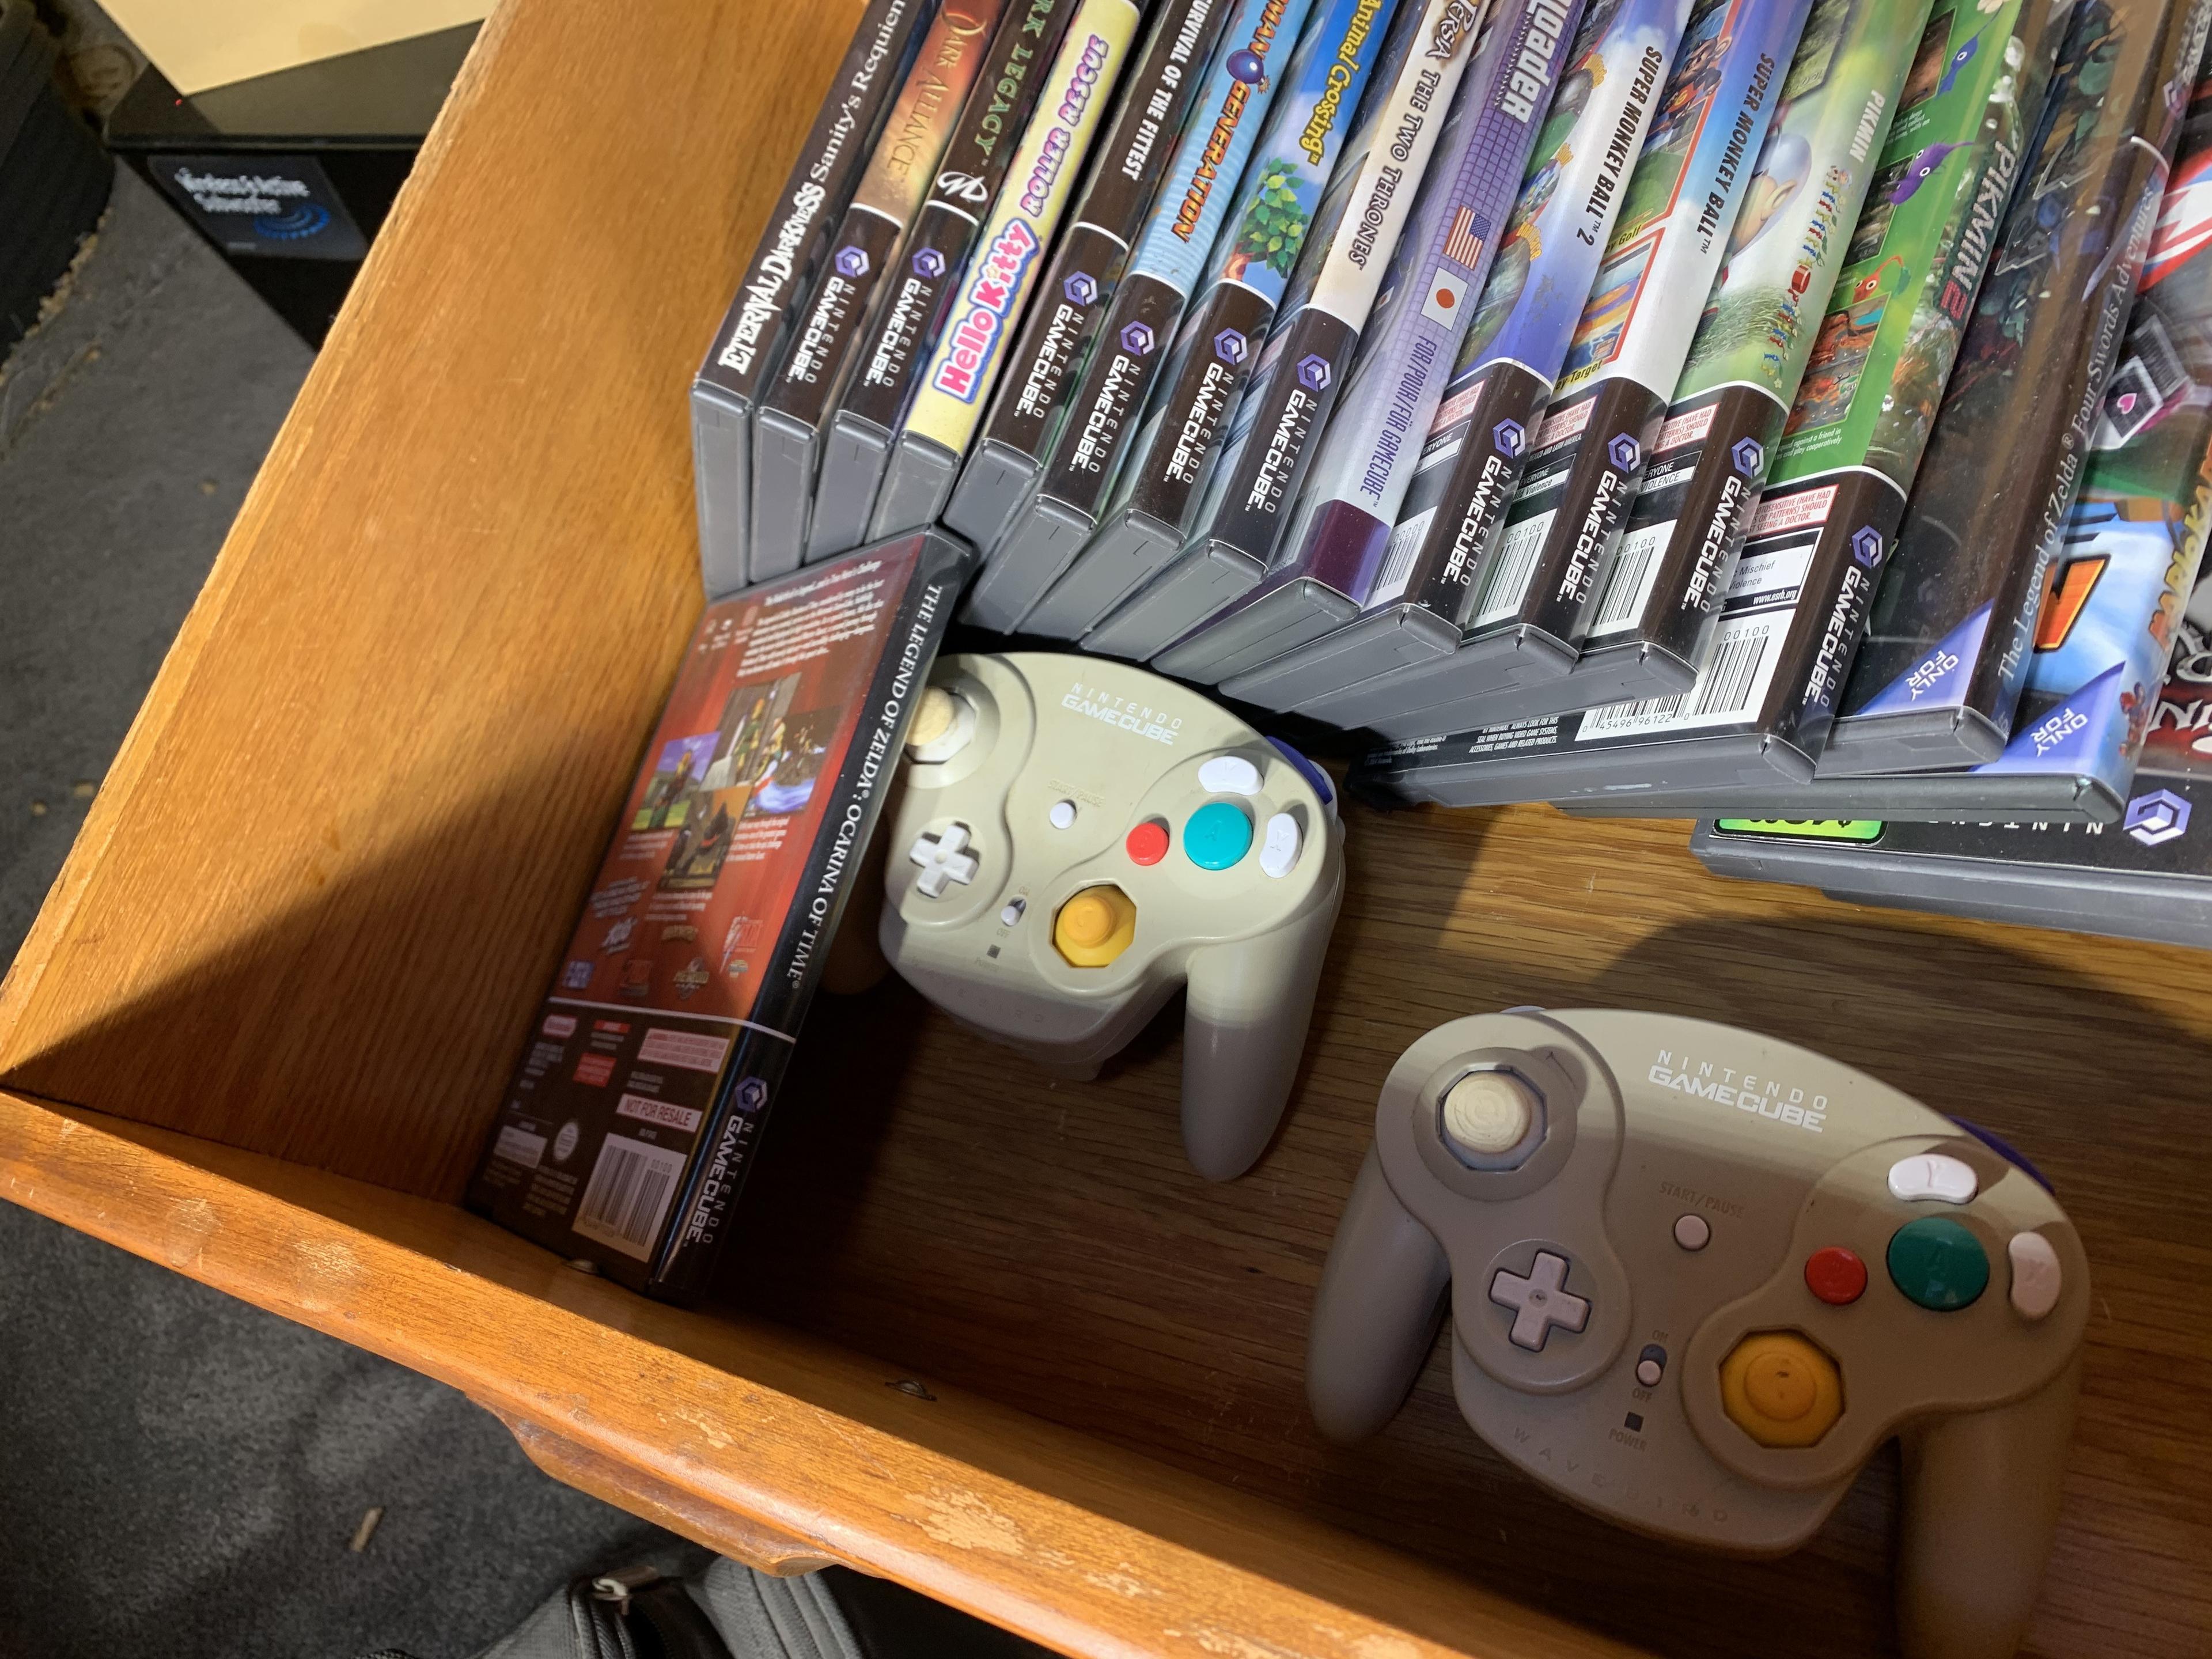 Gamecube Games, Controllers, Dance Dance Revolution game and pads